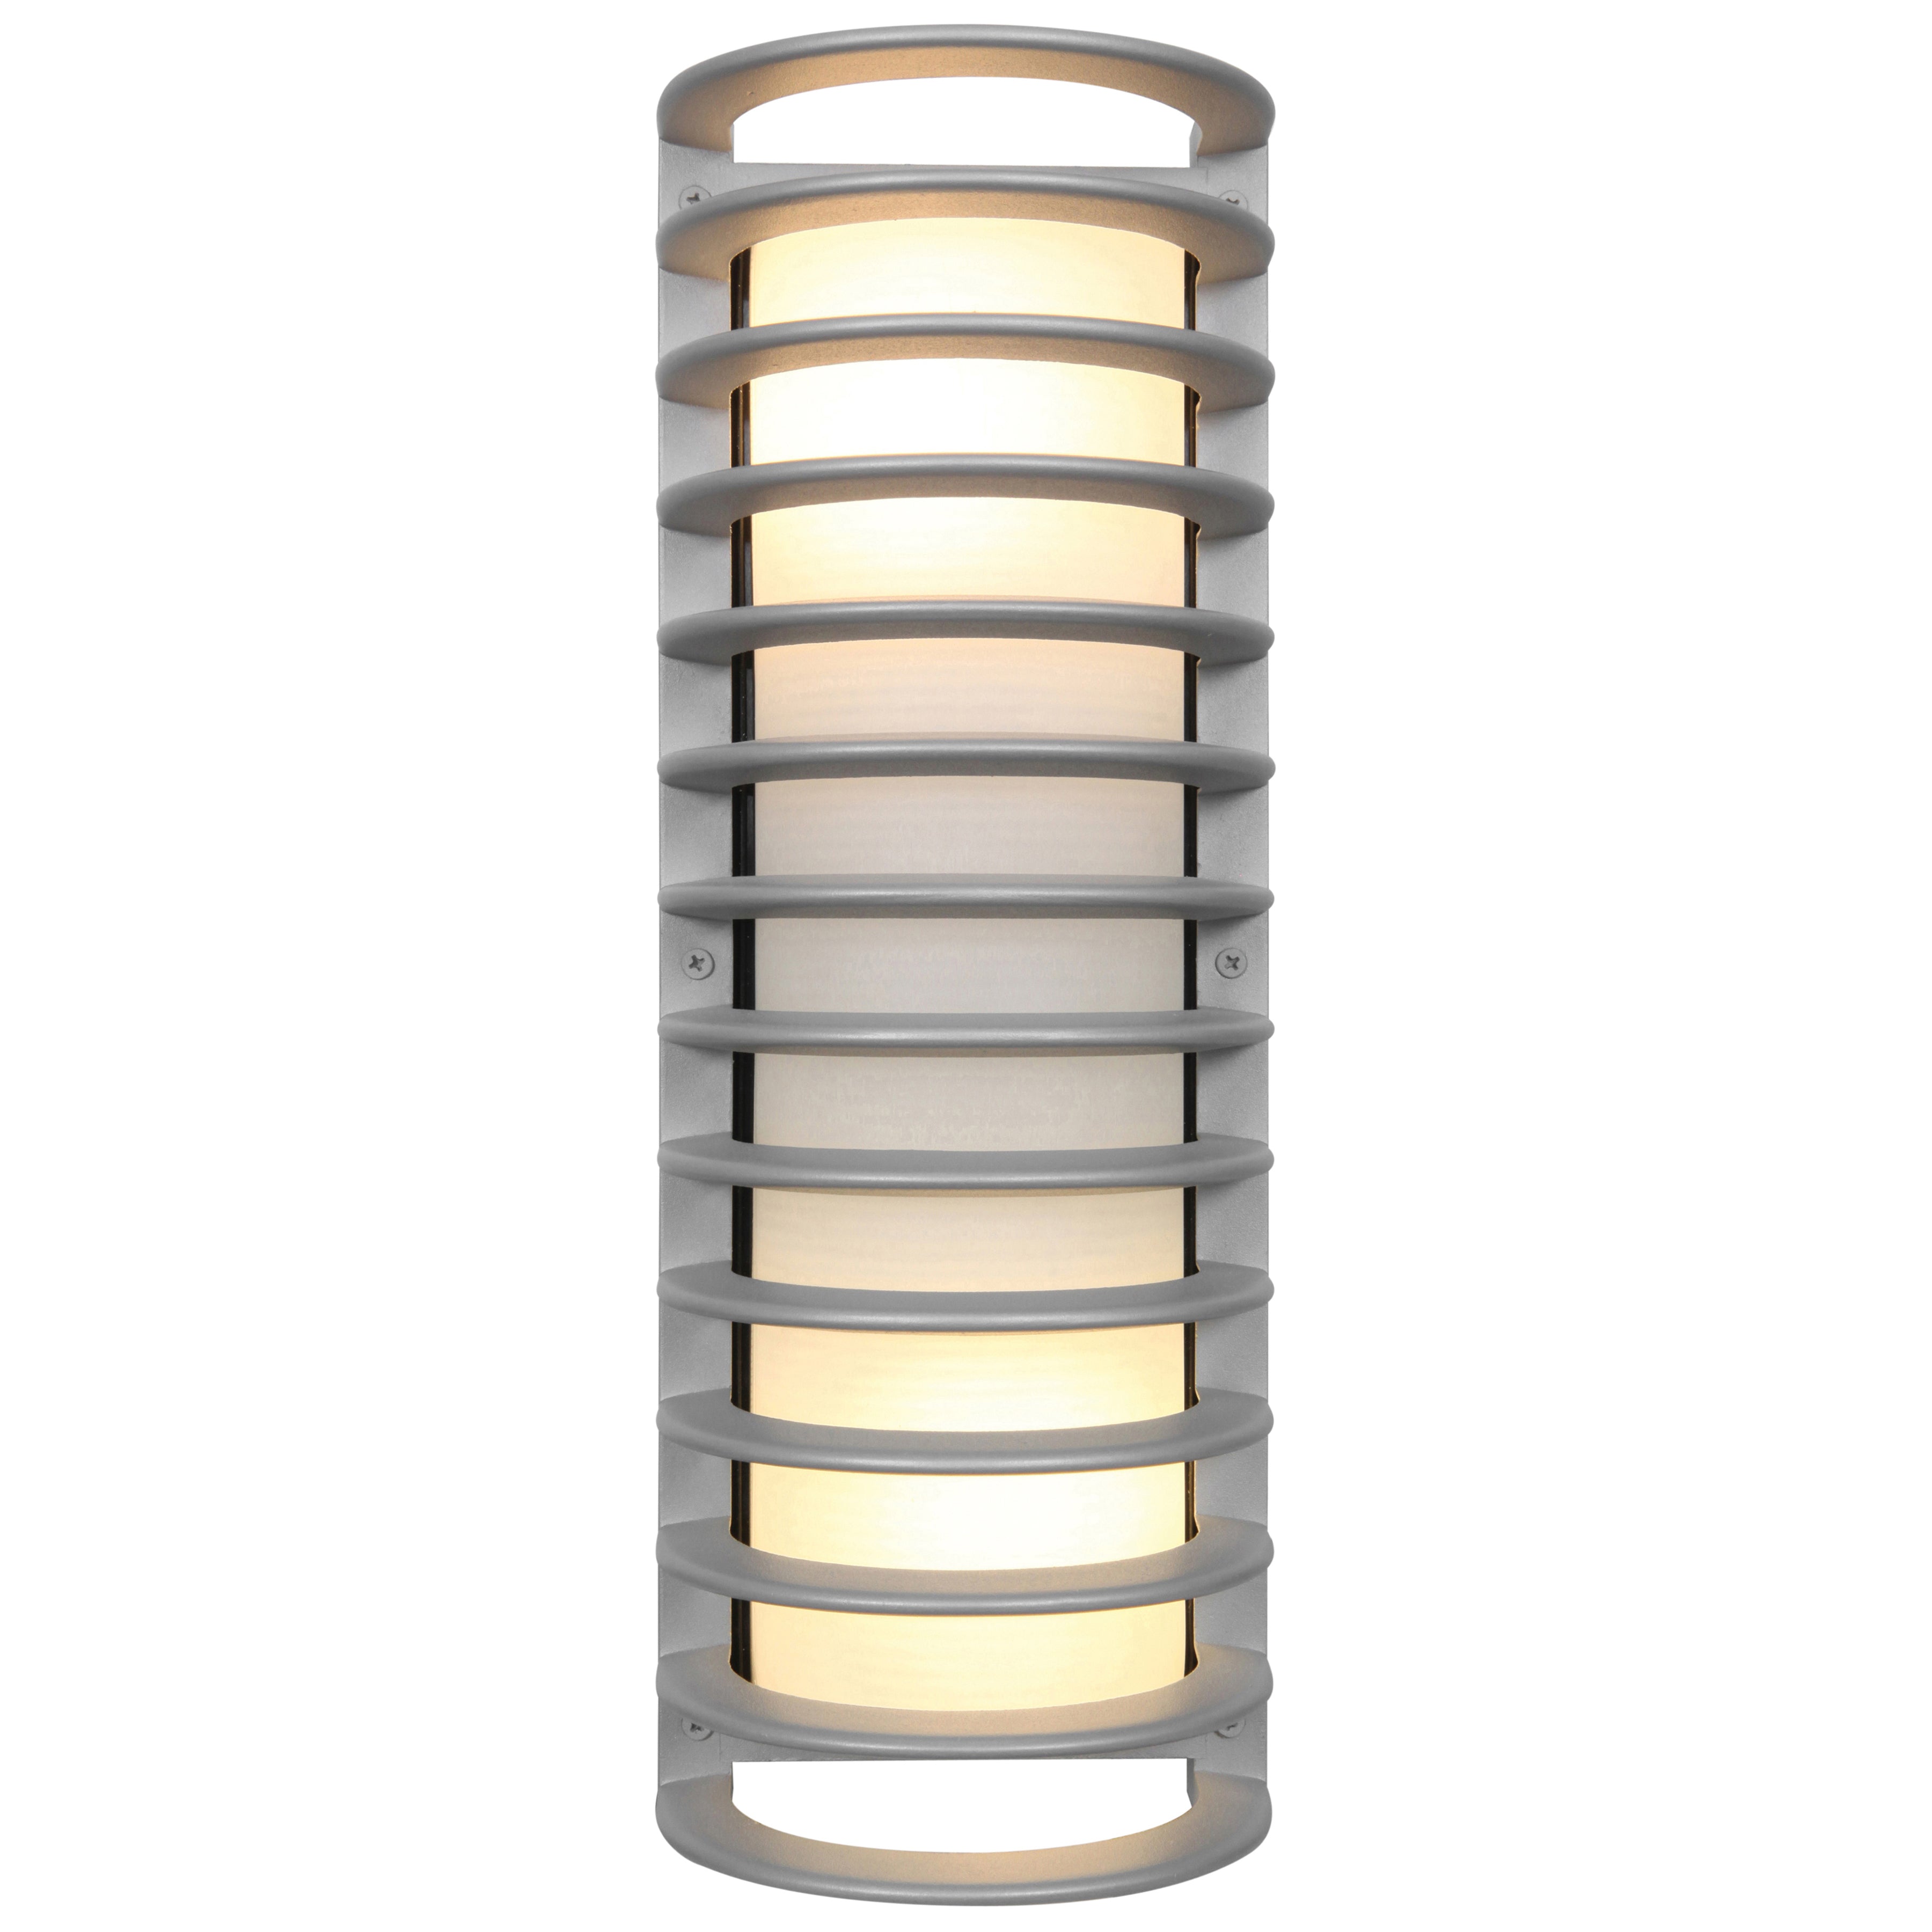 Bermuda Tall Outdoor LED Wall Mount Sconce, Satin